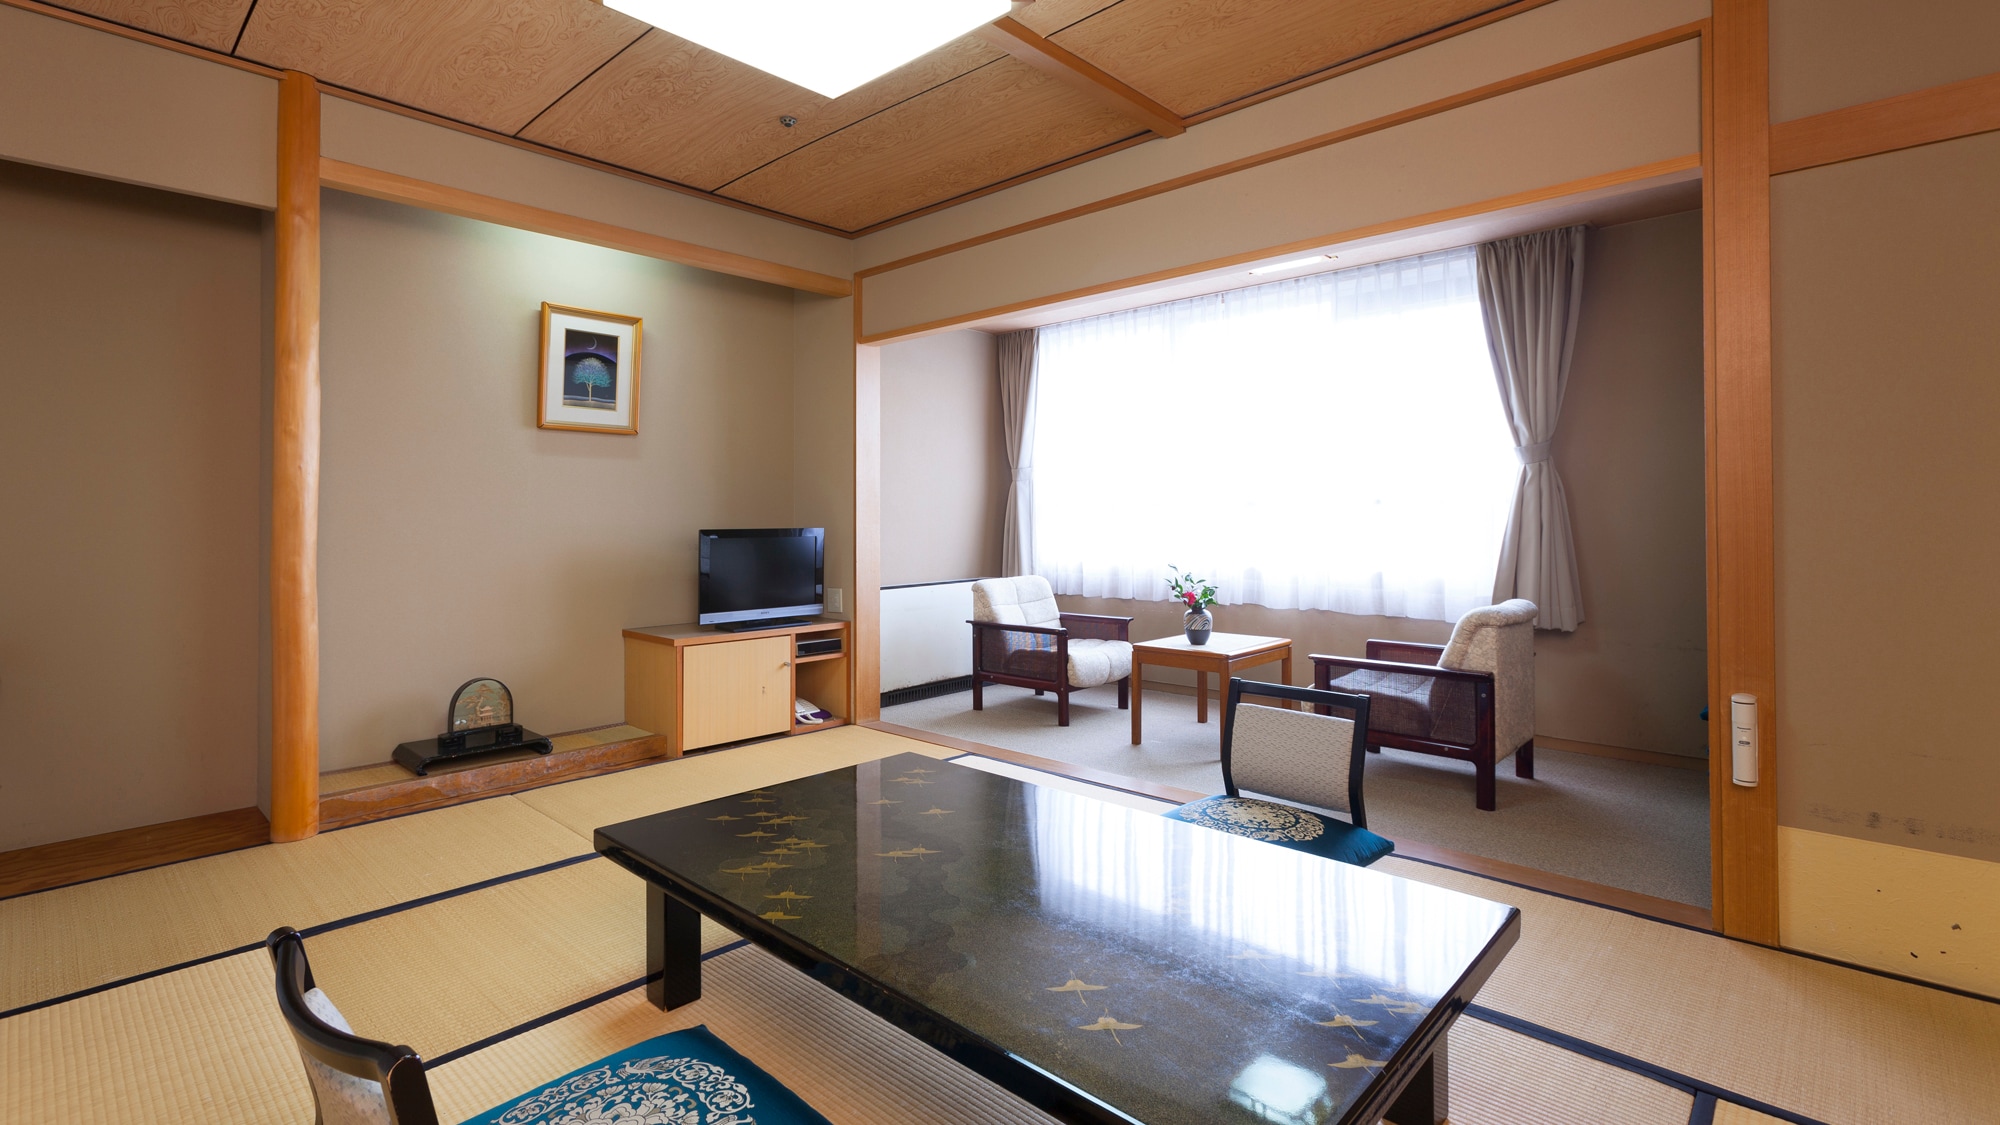 ◆ Japanese-style room